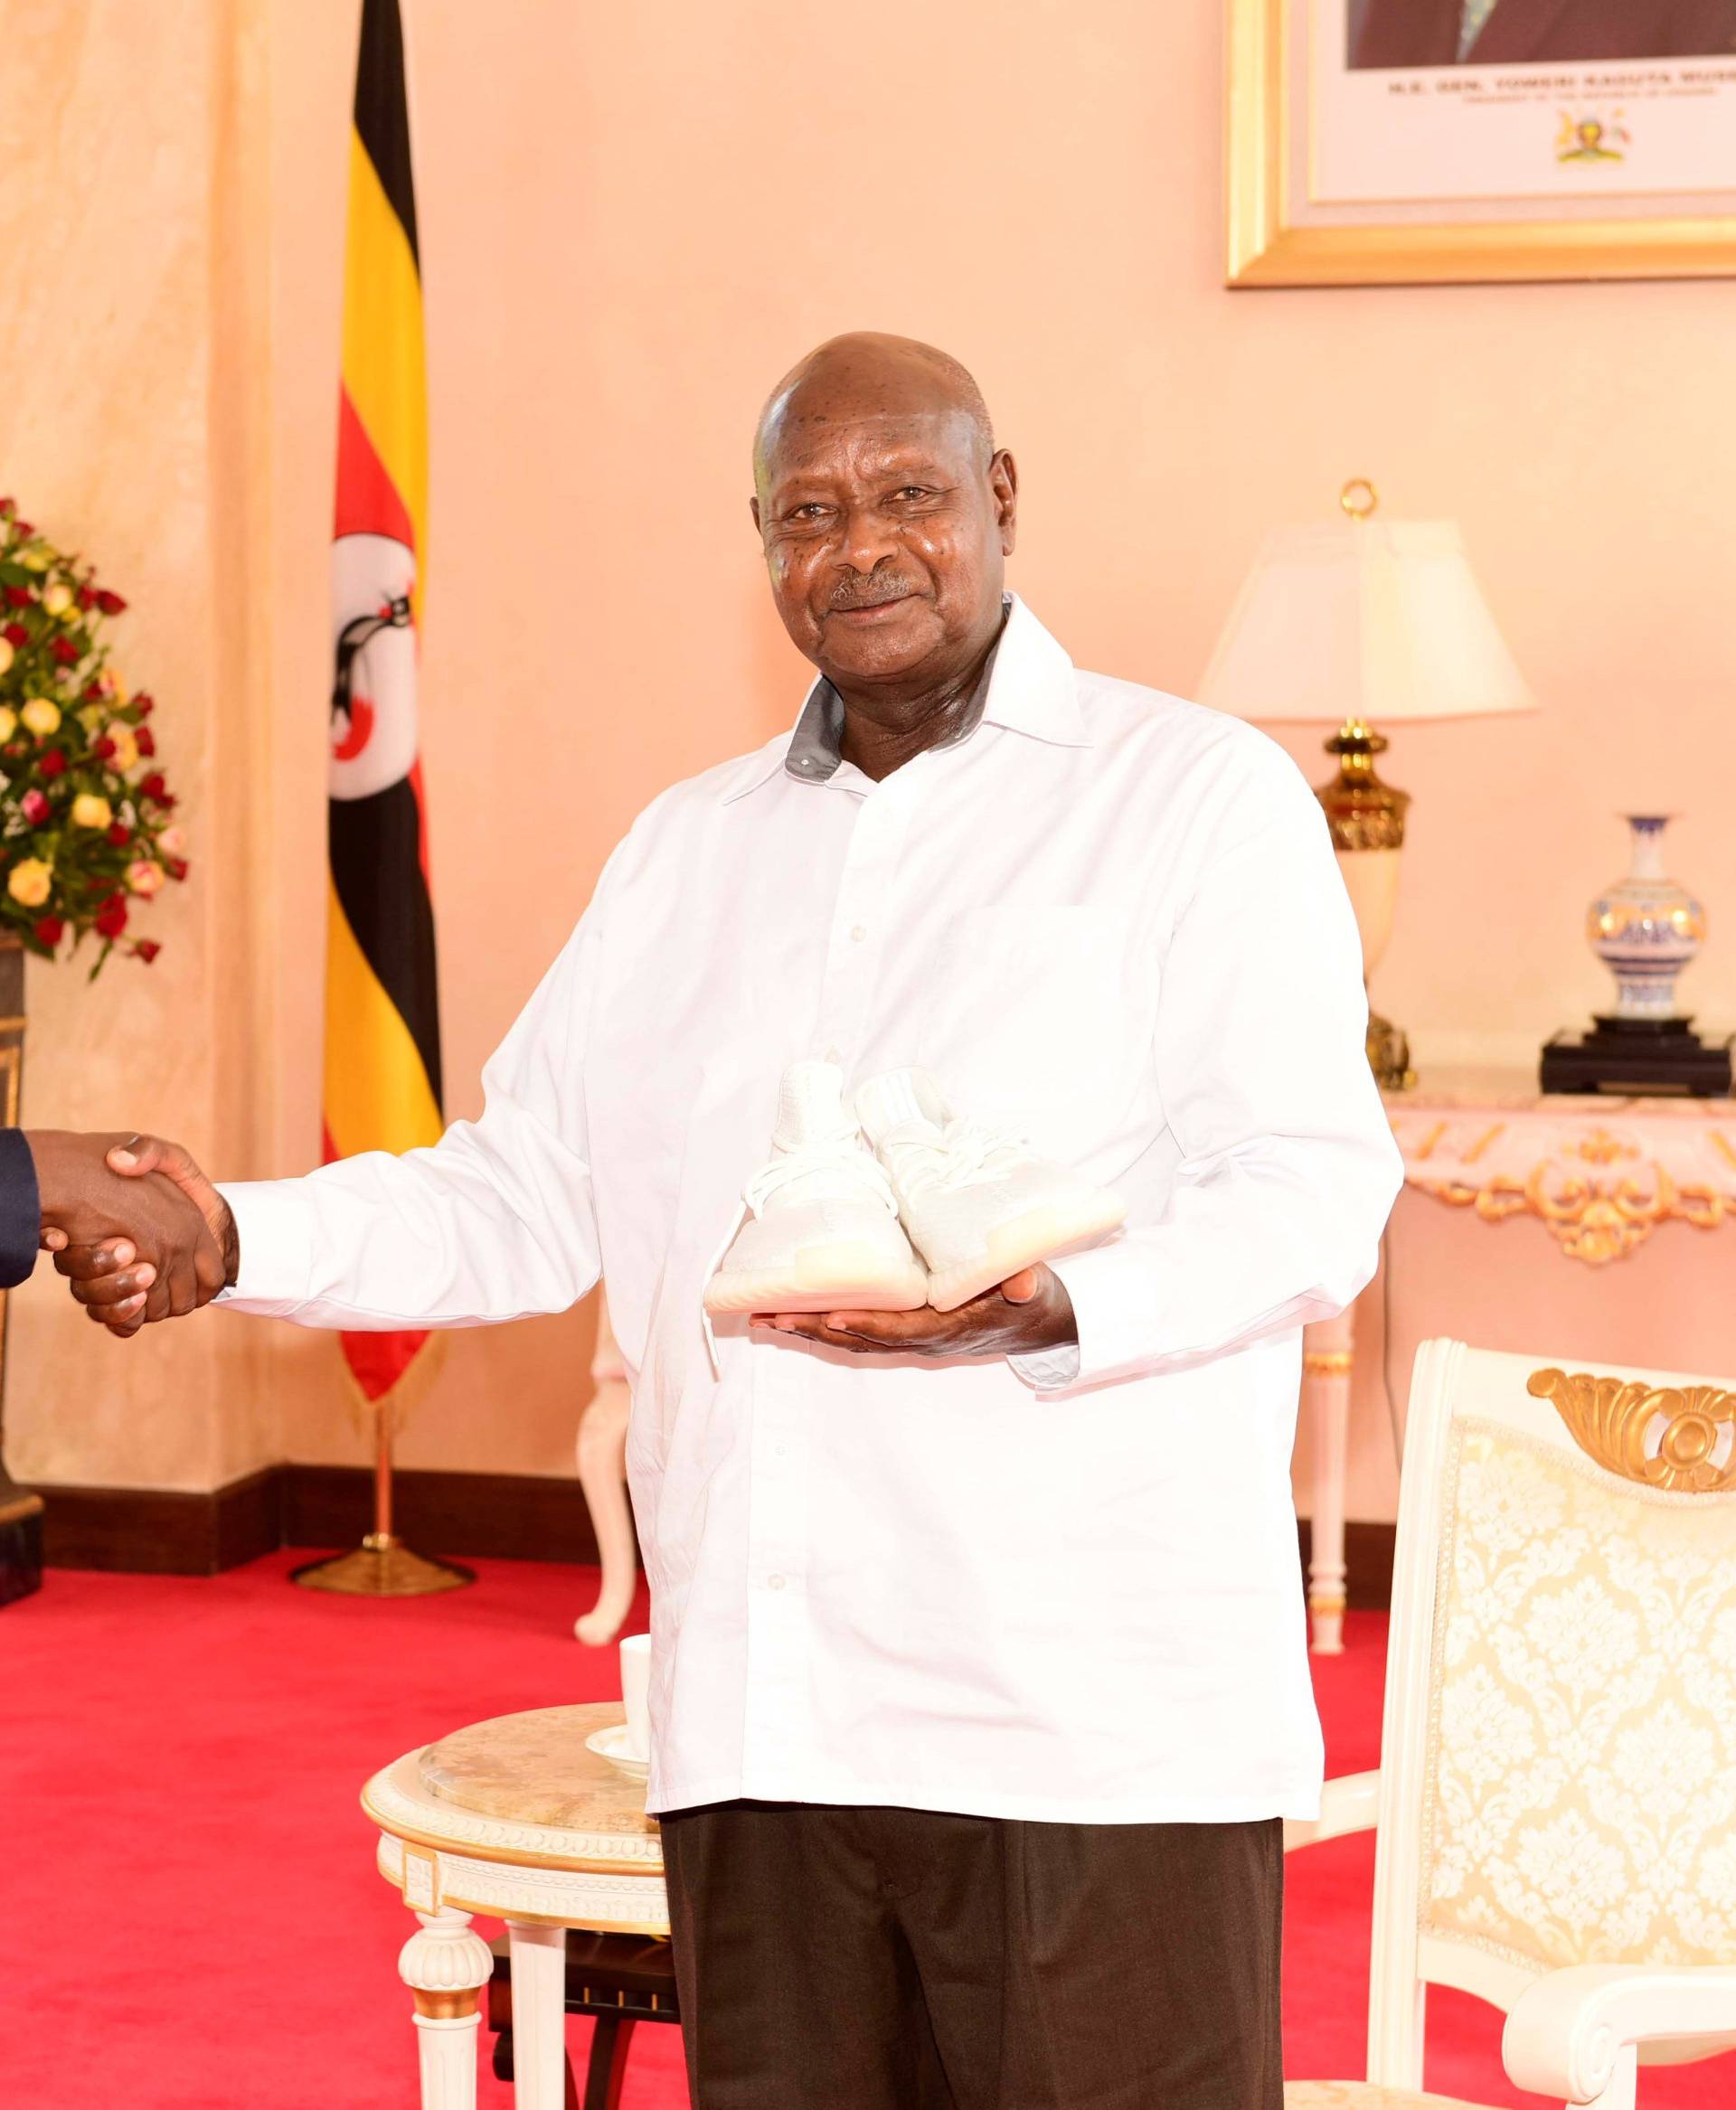 Rapper Kanye West (L) meets Uganda's President Yoweri Museveni when he paid a courtesy call at State House